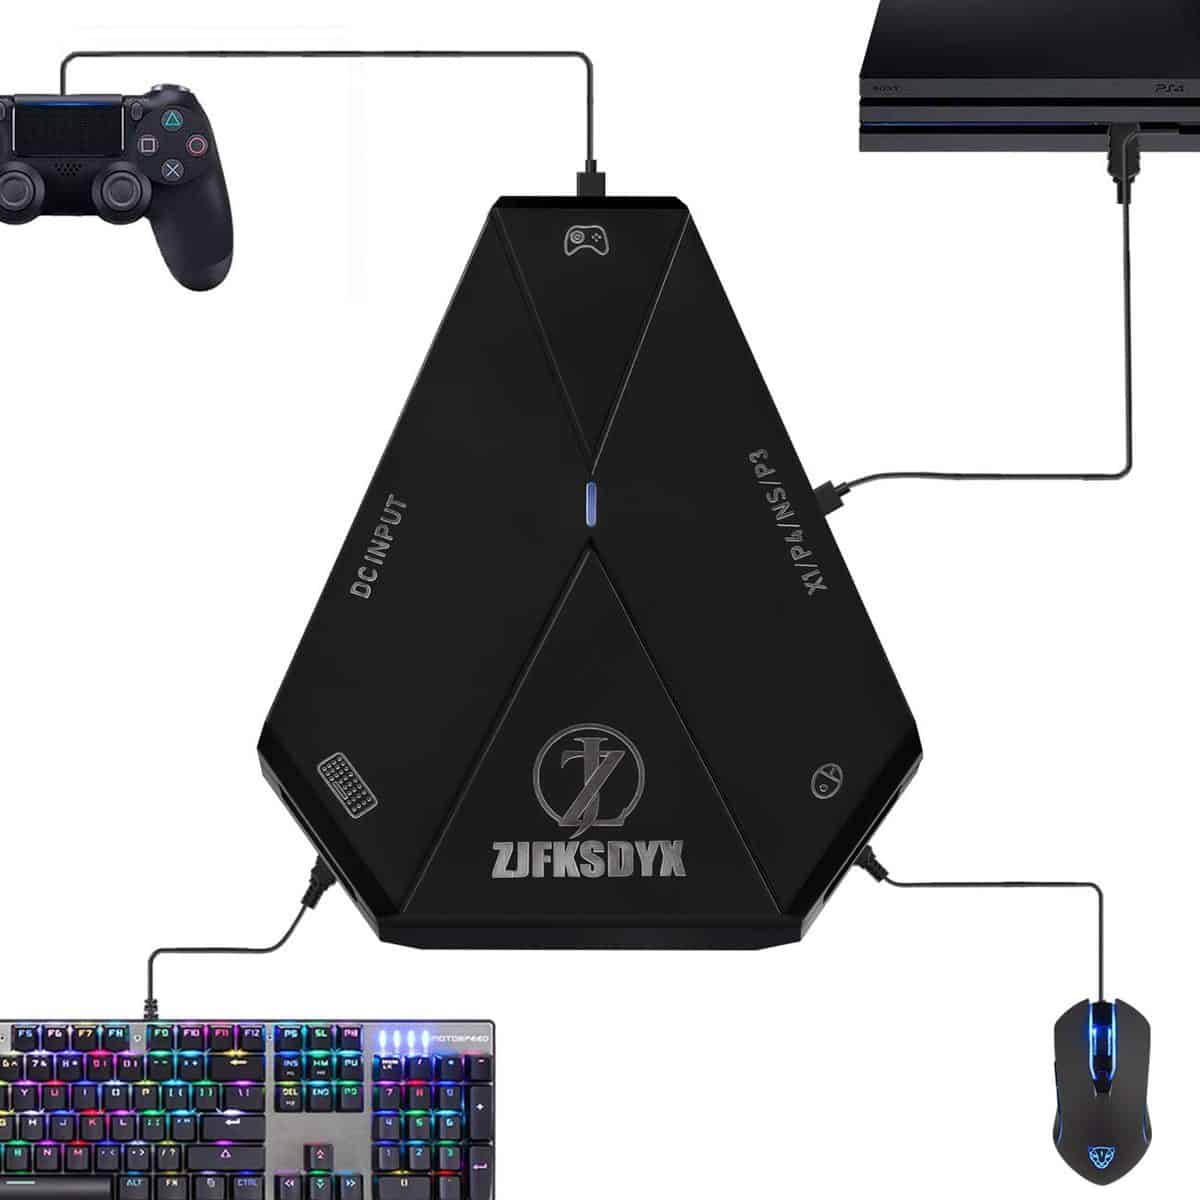 ps4 can use keyboard and mouse